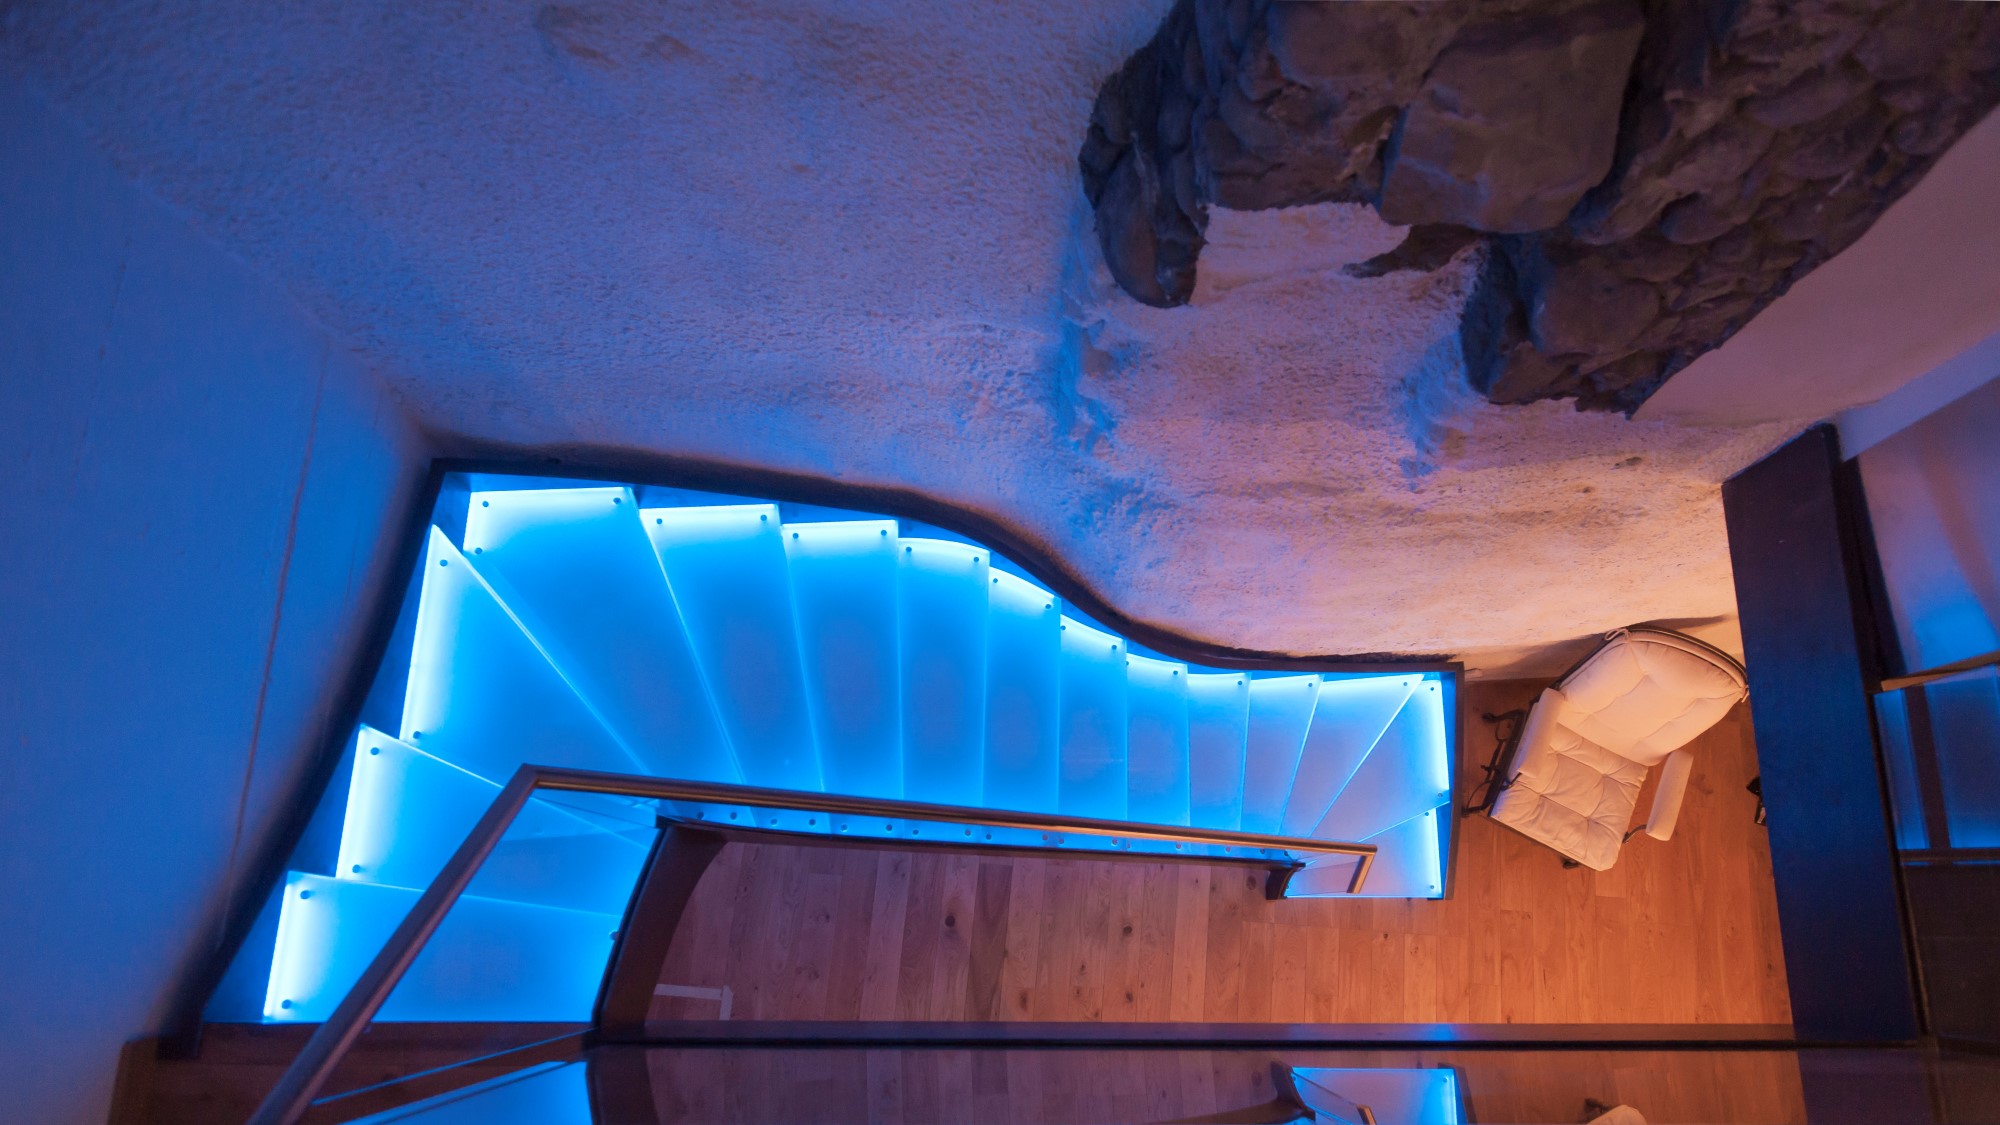 stair with LED light